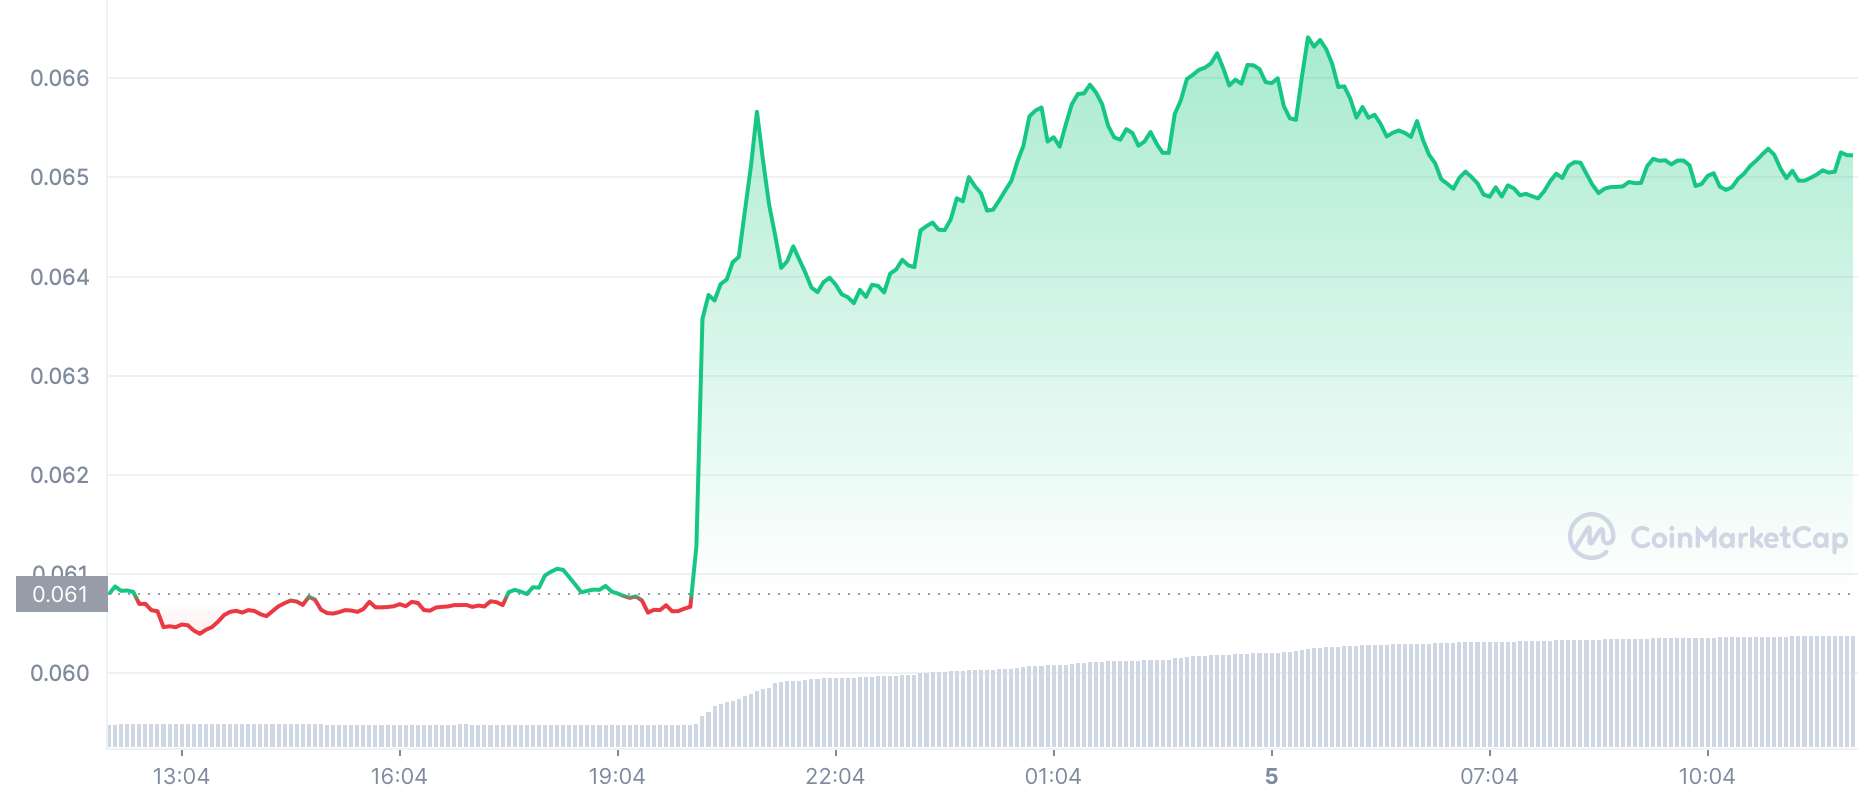 Dogecoin up 10% as Elon Musk Returns to Twitter Purchase Deal, What’s Next?